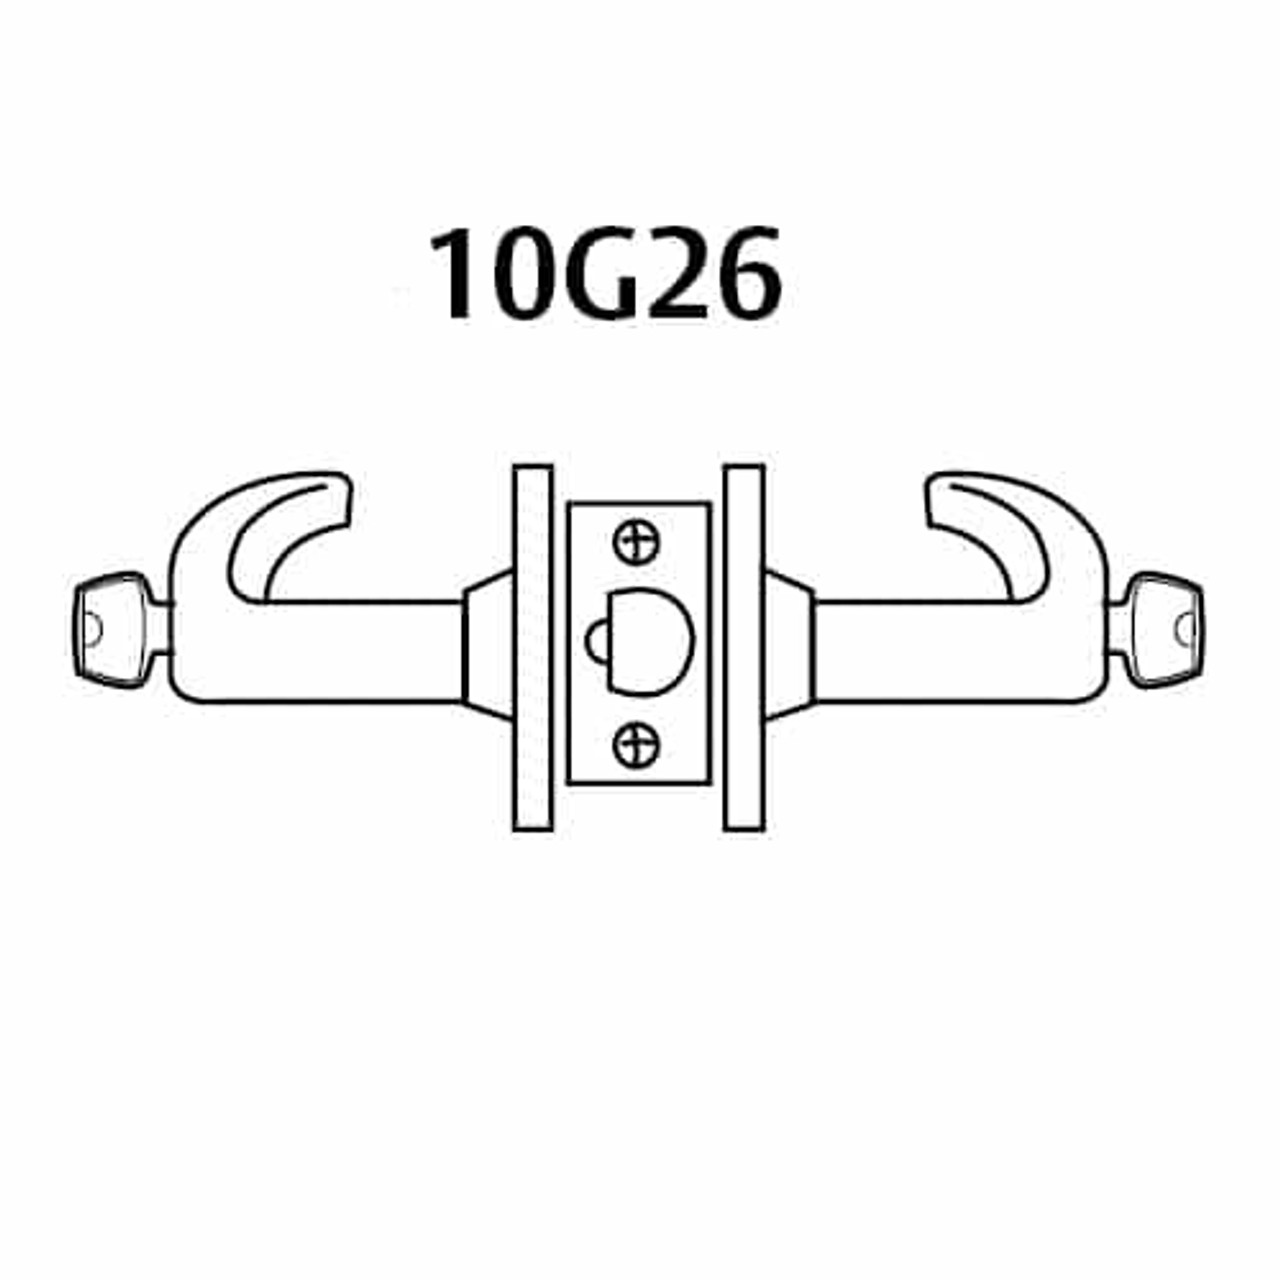 2860-10G26-LJ-10 Sargent 10 Line Cylindrical Storeroom Locks with J Lever Design and L Rose Prepped for LFIC in Dull Bronze